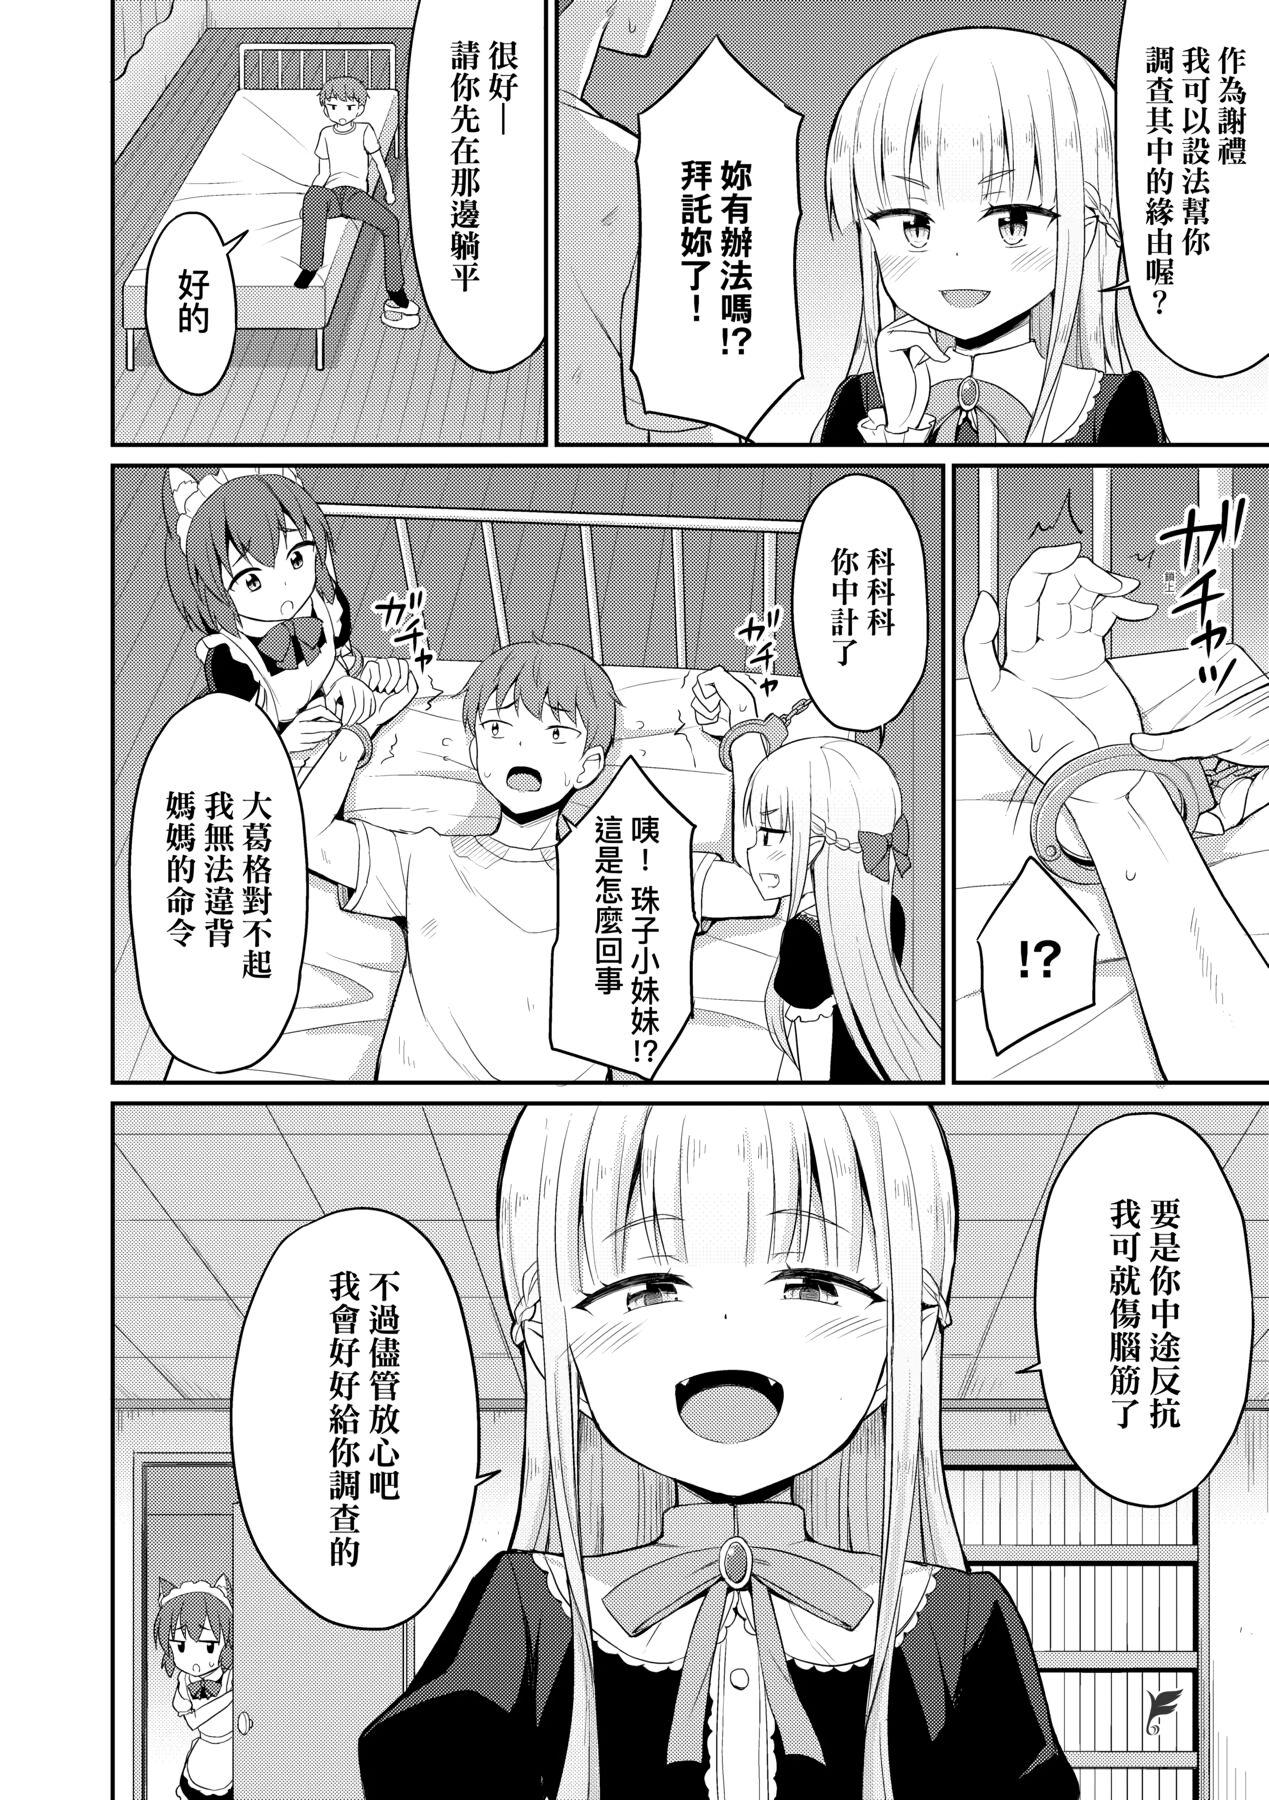 Off Cafe Eternal e Youkoso! | 歡迎光臨咖啡永遠娘! Blowing - Page 11